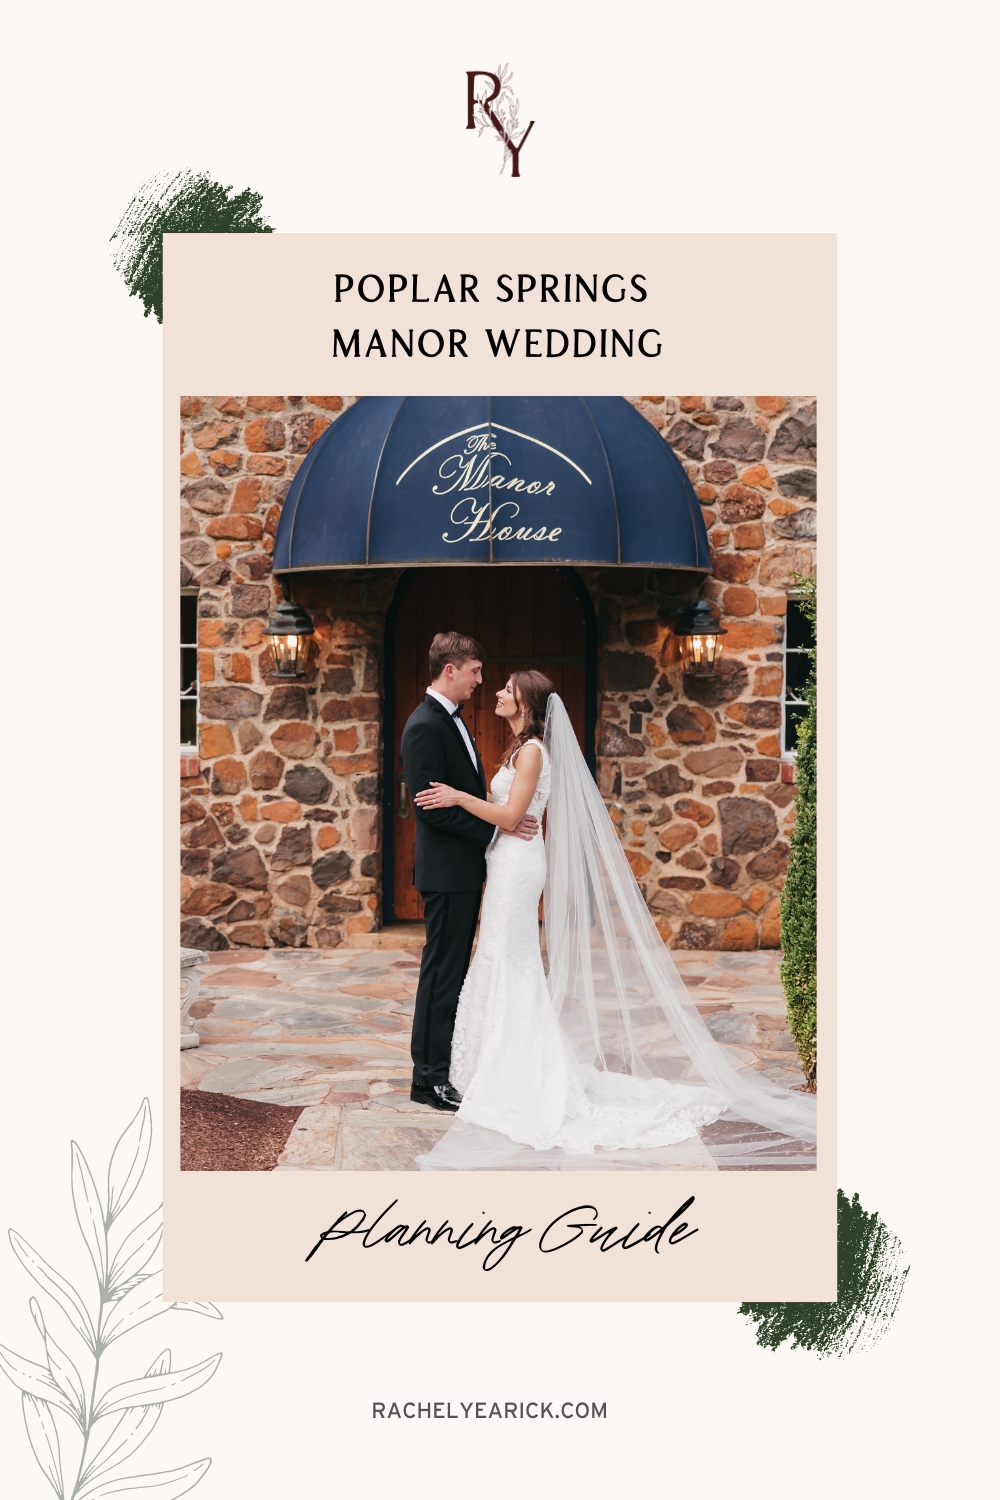 Bride and groom smiling at each other as they share an embrace; image overlaid with text that reads Poplar Springs Manor Wedding Planning Guide